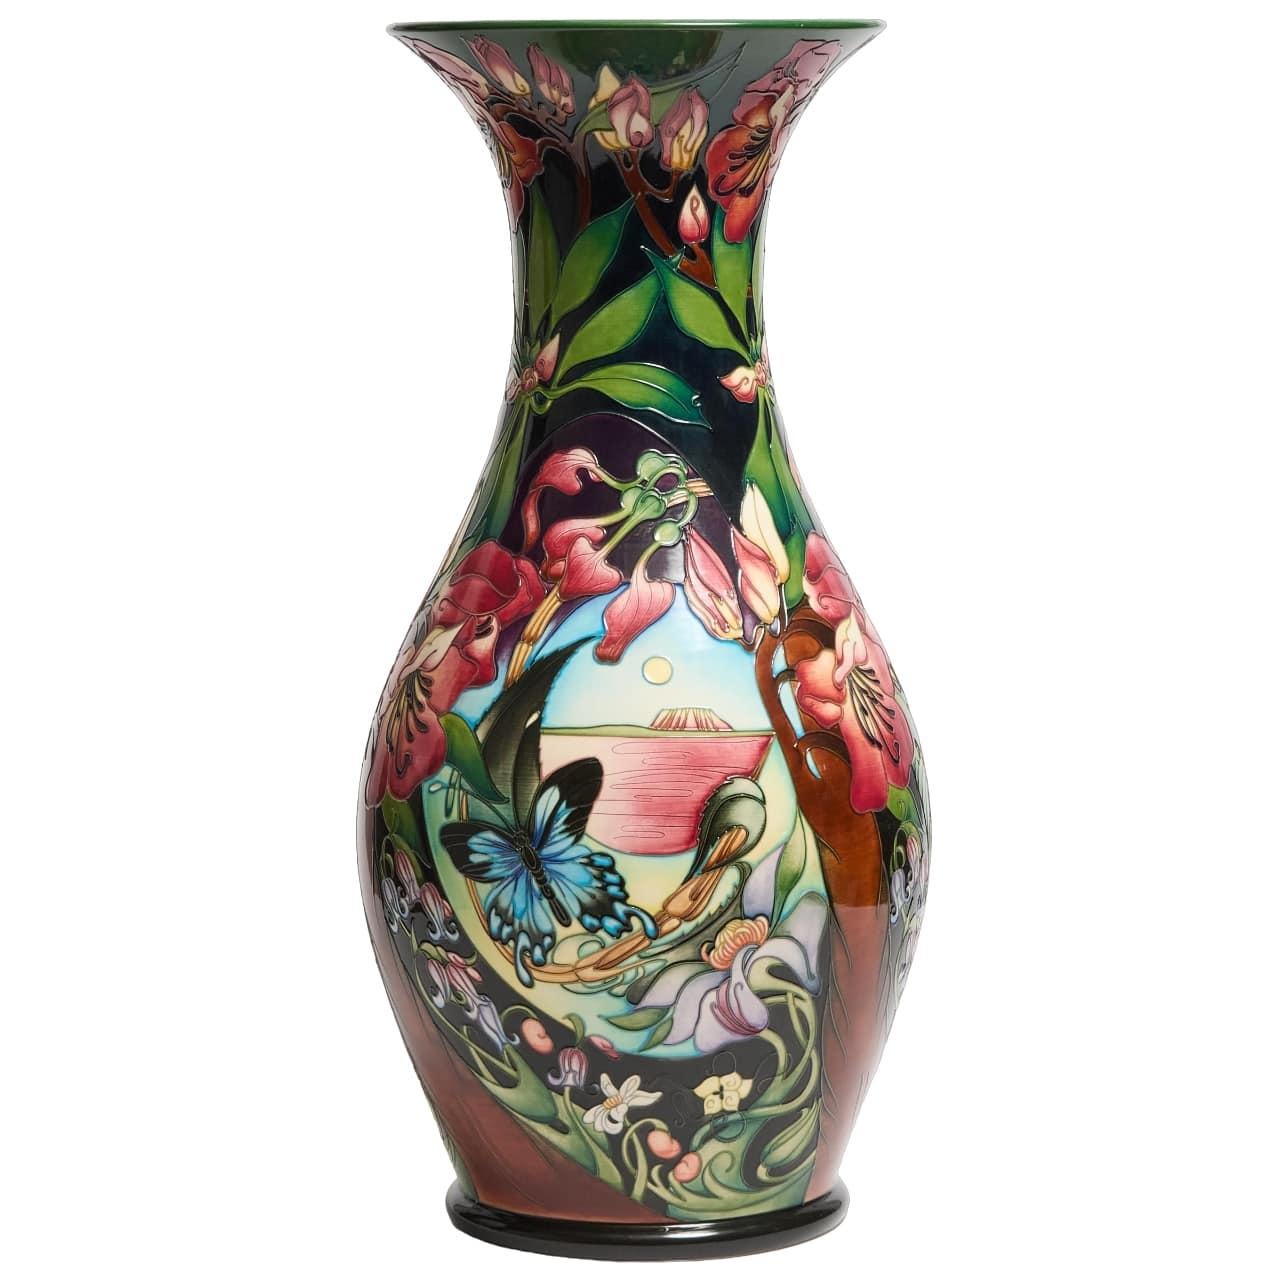 'Hidden Dreams' a Limited Edition Large Vase, 2005 of baluster form with flared rim, the design incorporates eight designs, with motifs including a Heron and frog, leaping fish, a butterfly, magnolia flowers, and Ayers Rock (Uluru), in vibrant